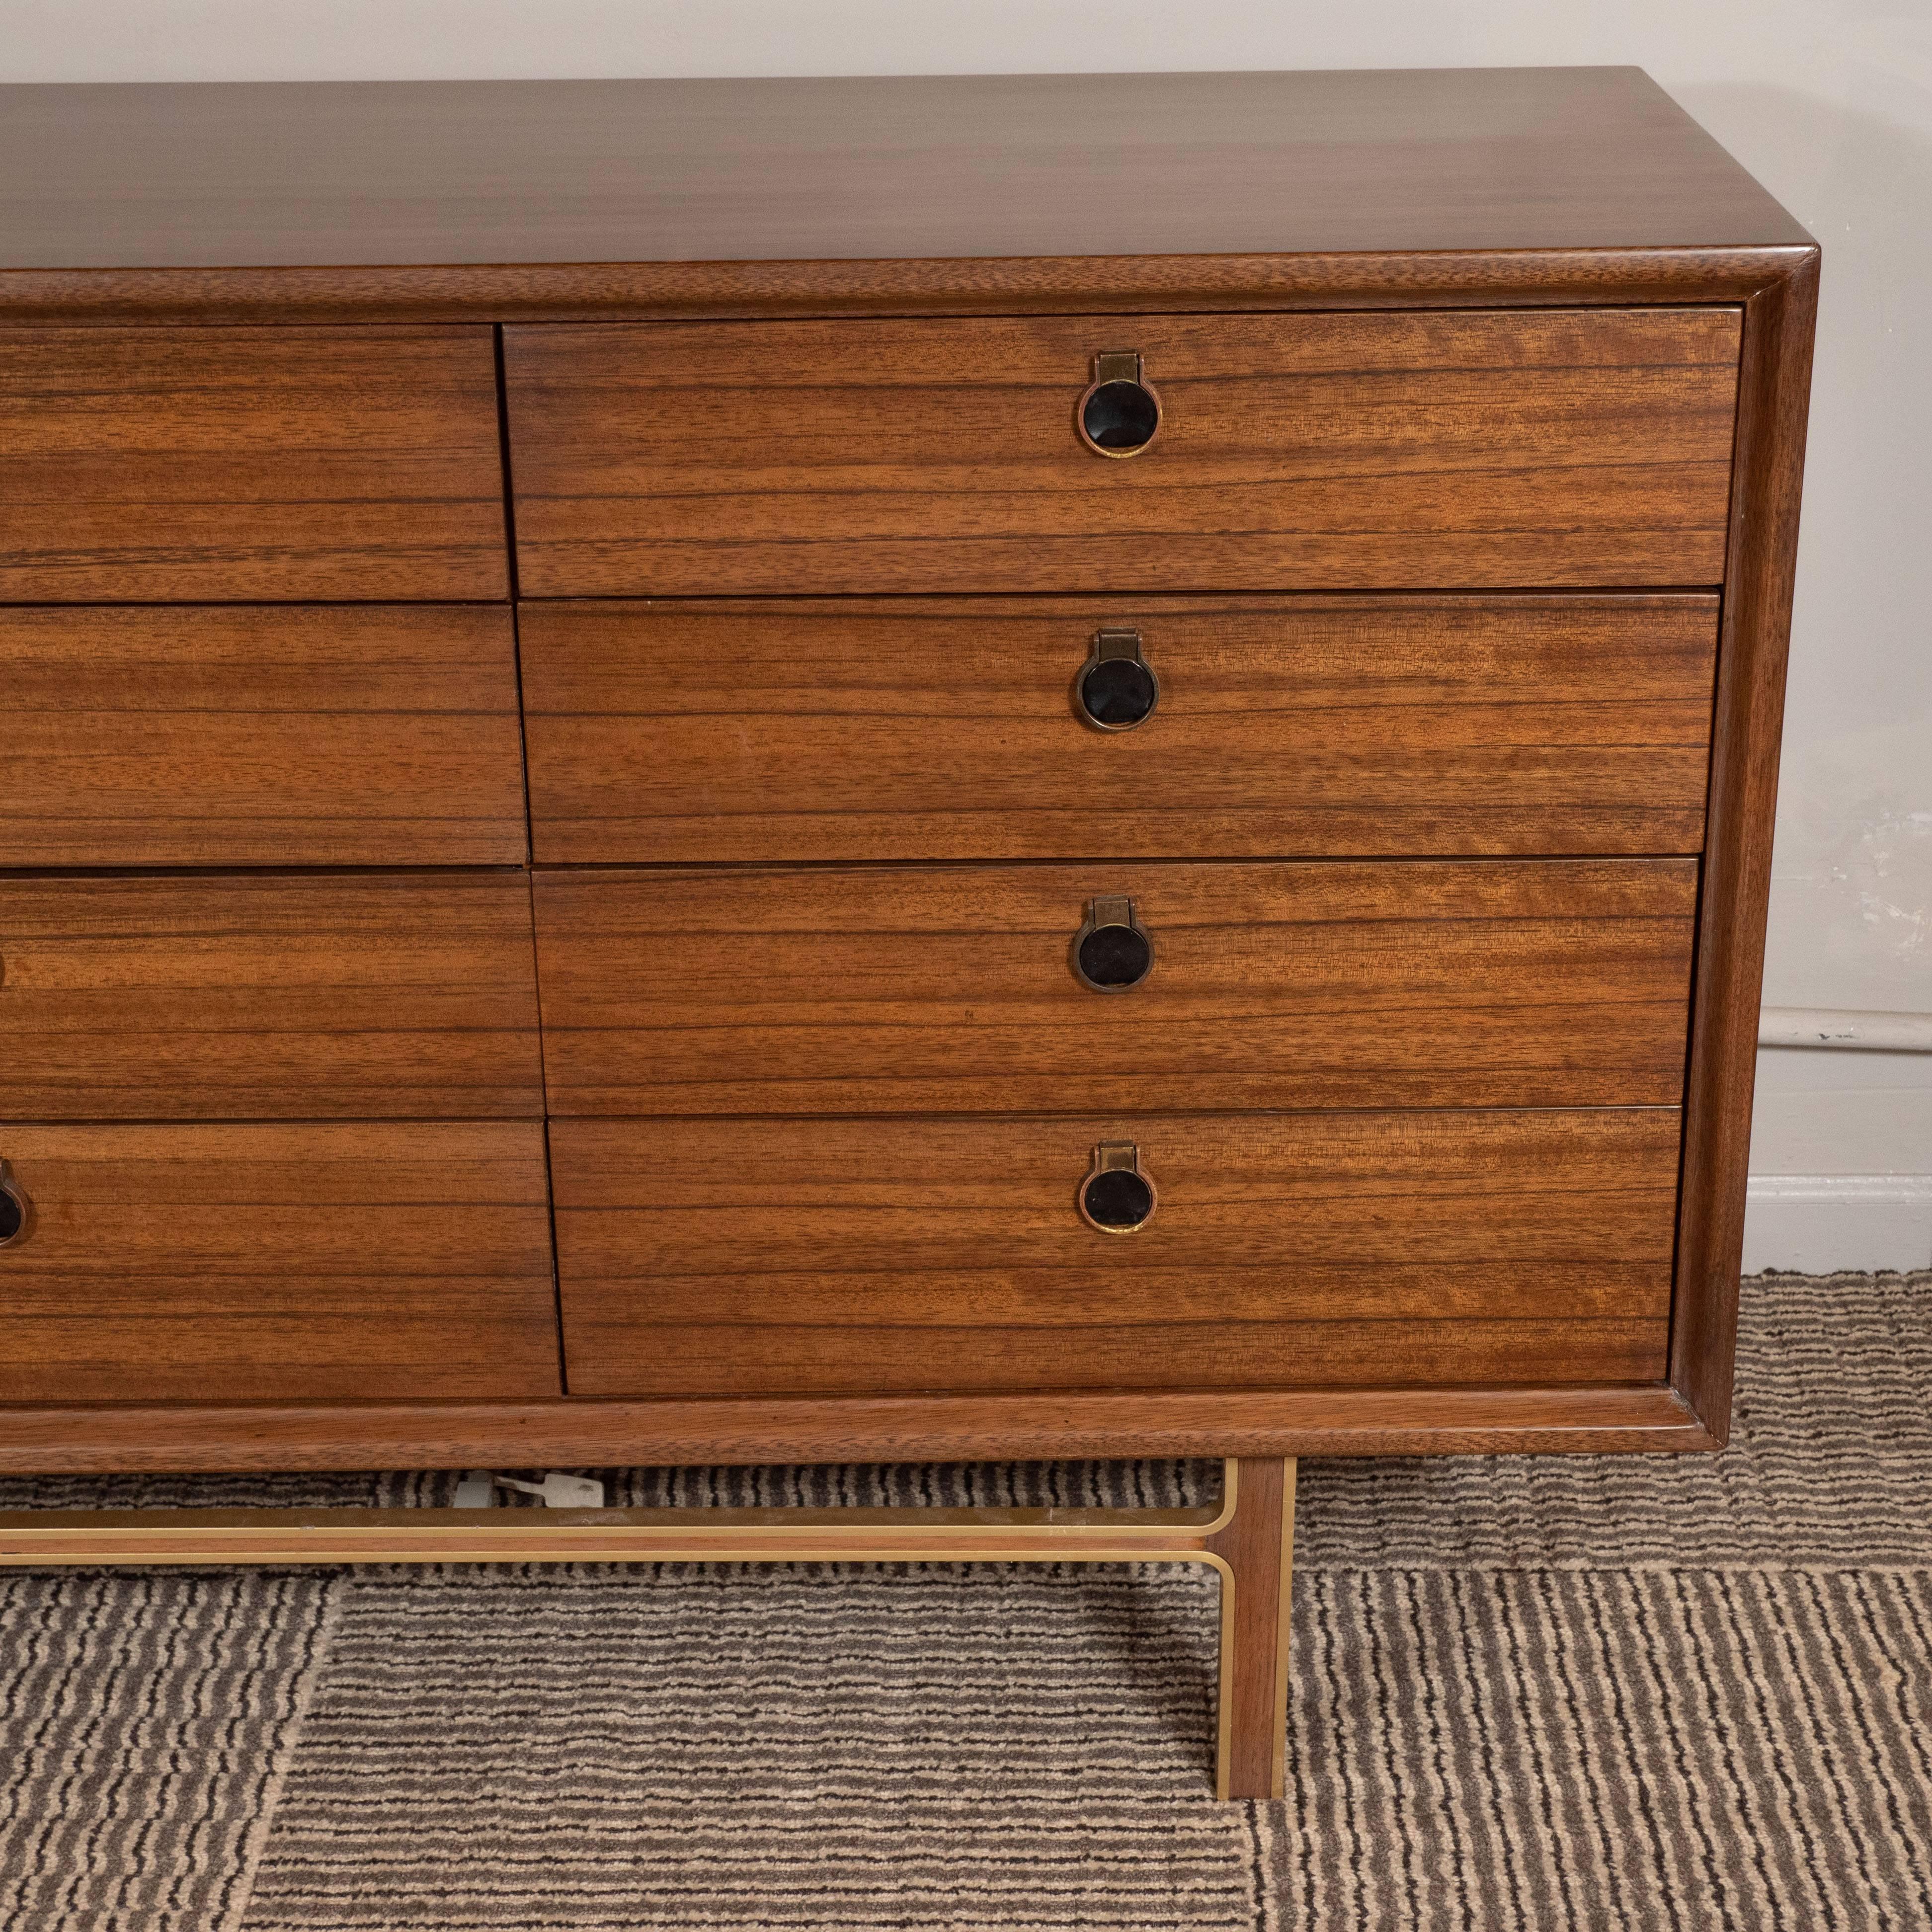 This elegant dresser was realized in the United States, circa 1960. It features a rectangular body with twelve drawers with circular brass pulls. Additionally, it offers straight rectangular legs adjoined at right angles by an apron of the same